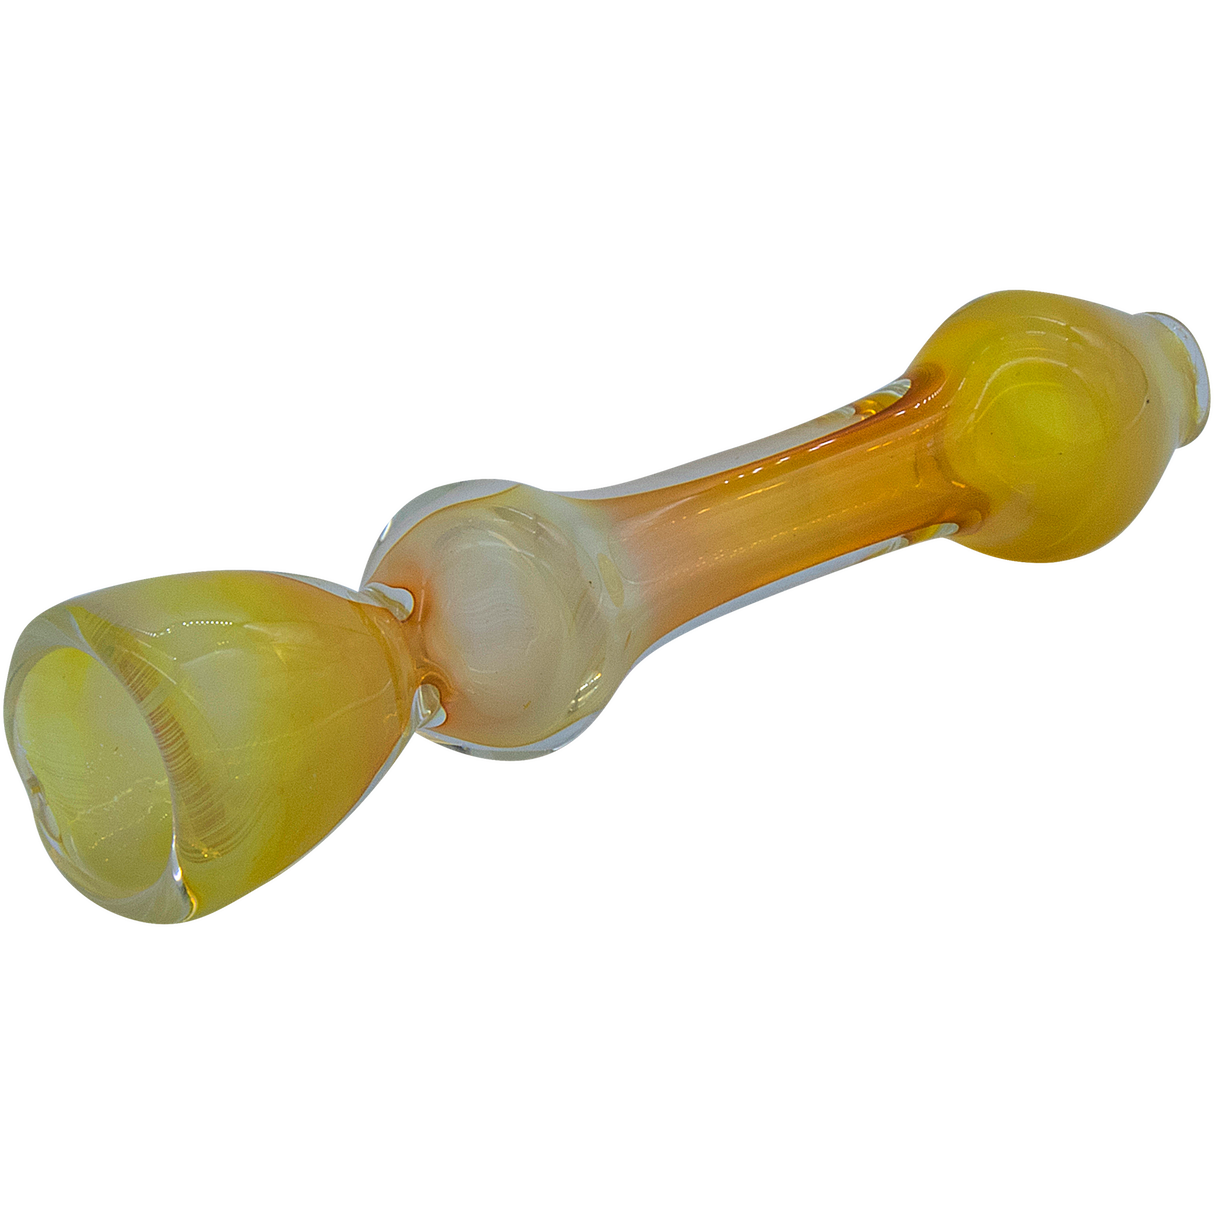 LA Pipes "Chill Fumes" Silver Fumed Chillum, Color Changing, 3.5" Borosilicate Glass, USA Made